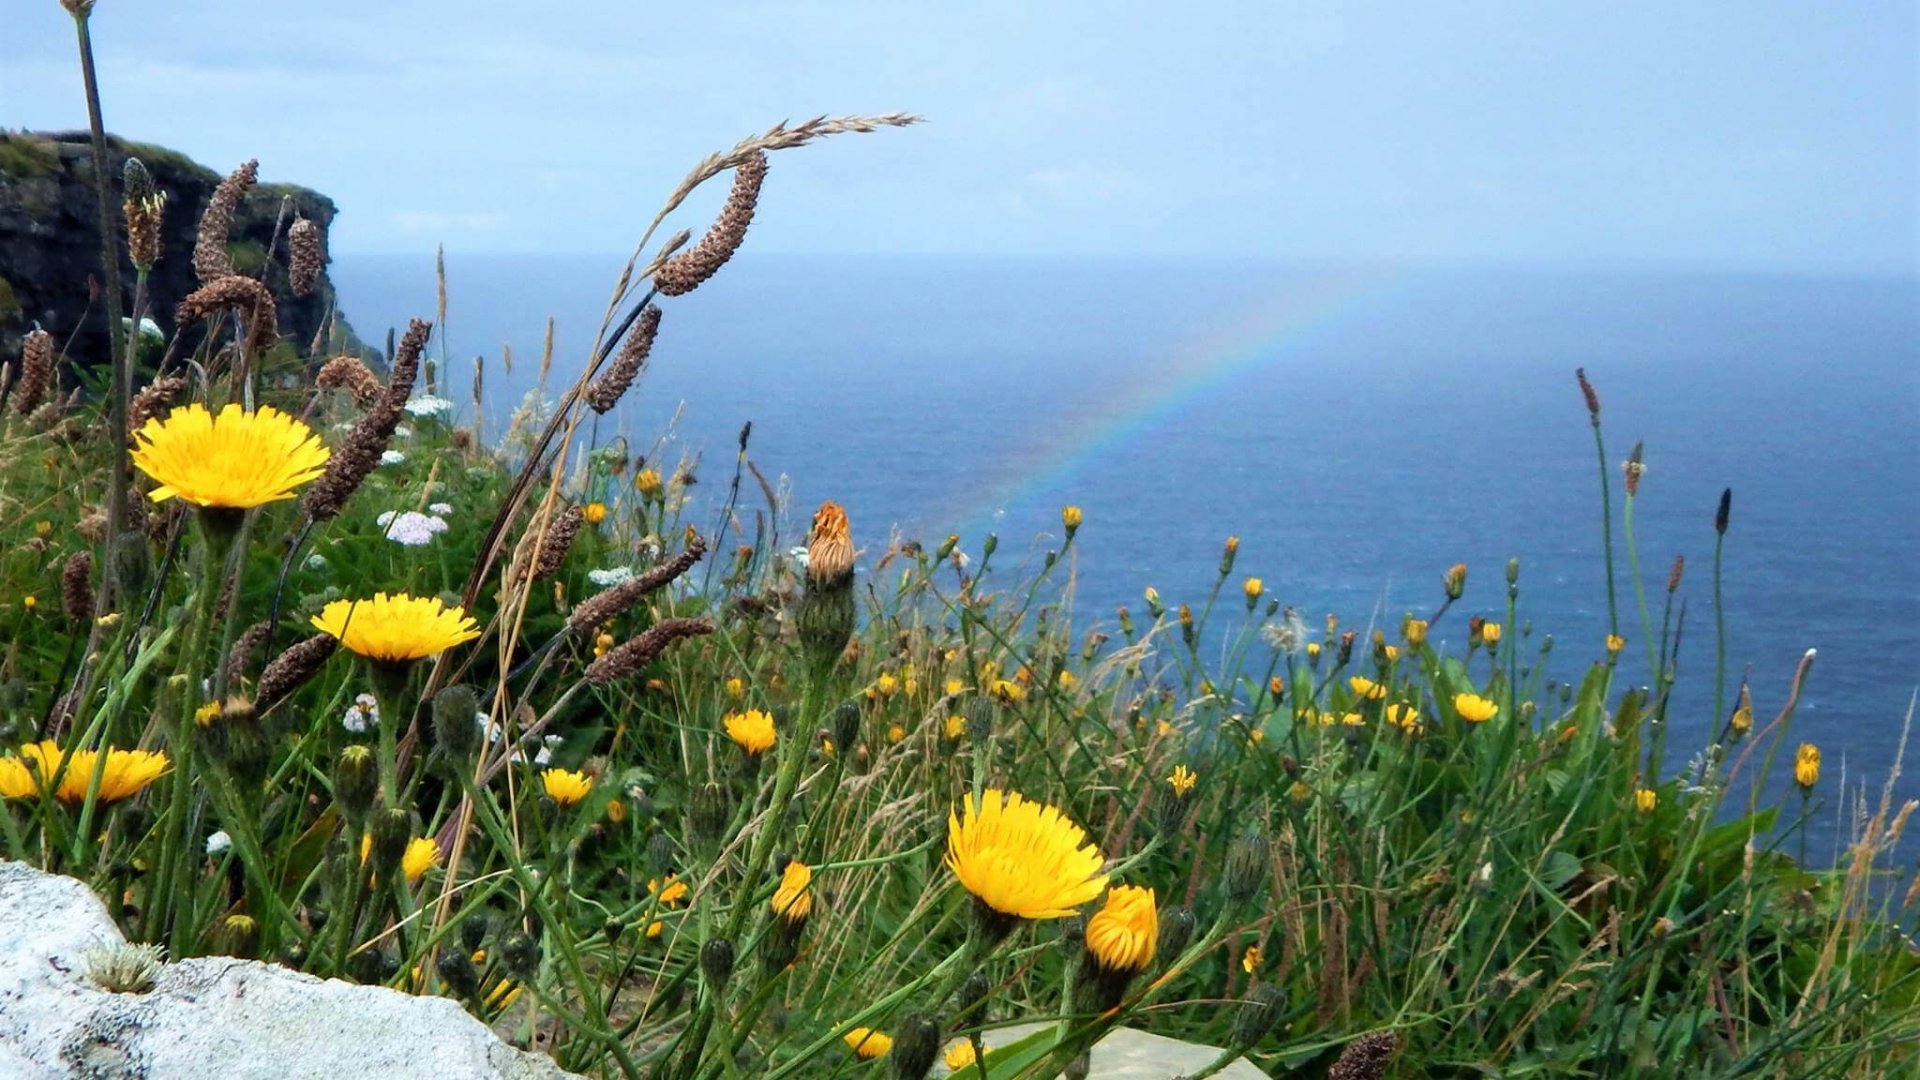 Rainbow hits the Cliffs of Moher in the background while yellow wildflowers grow amongst grass in the foreground, Ireland